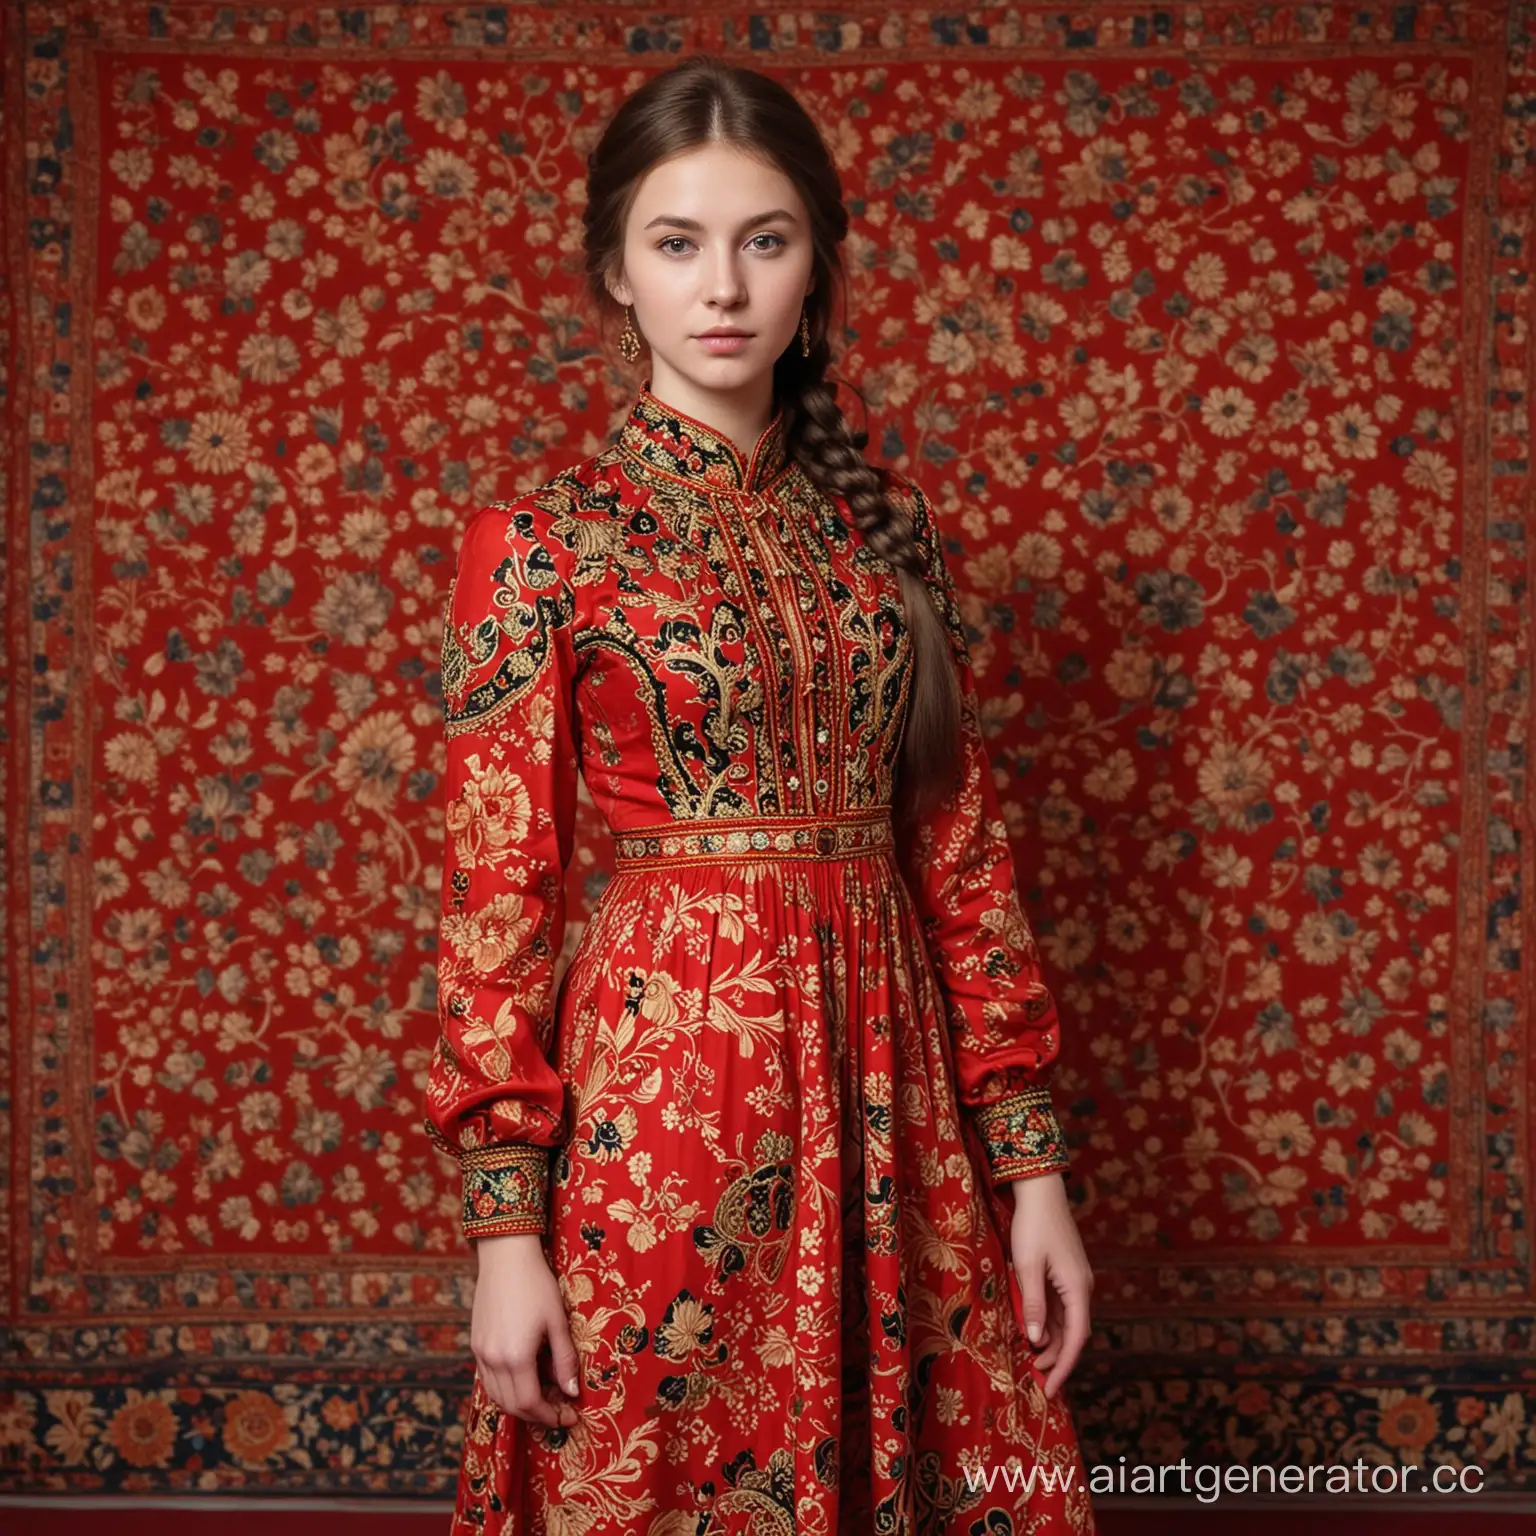 Young-Woman-in-Khokhloma-Patterned-Military-Costume